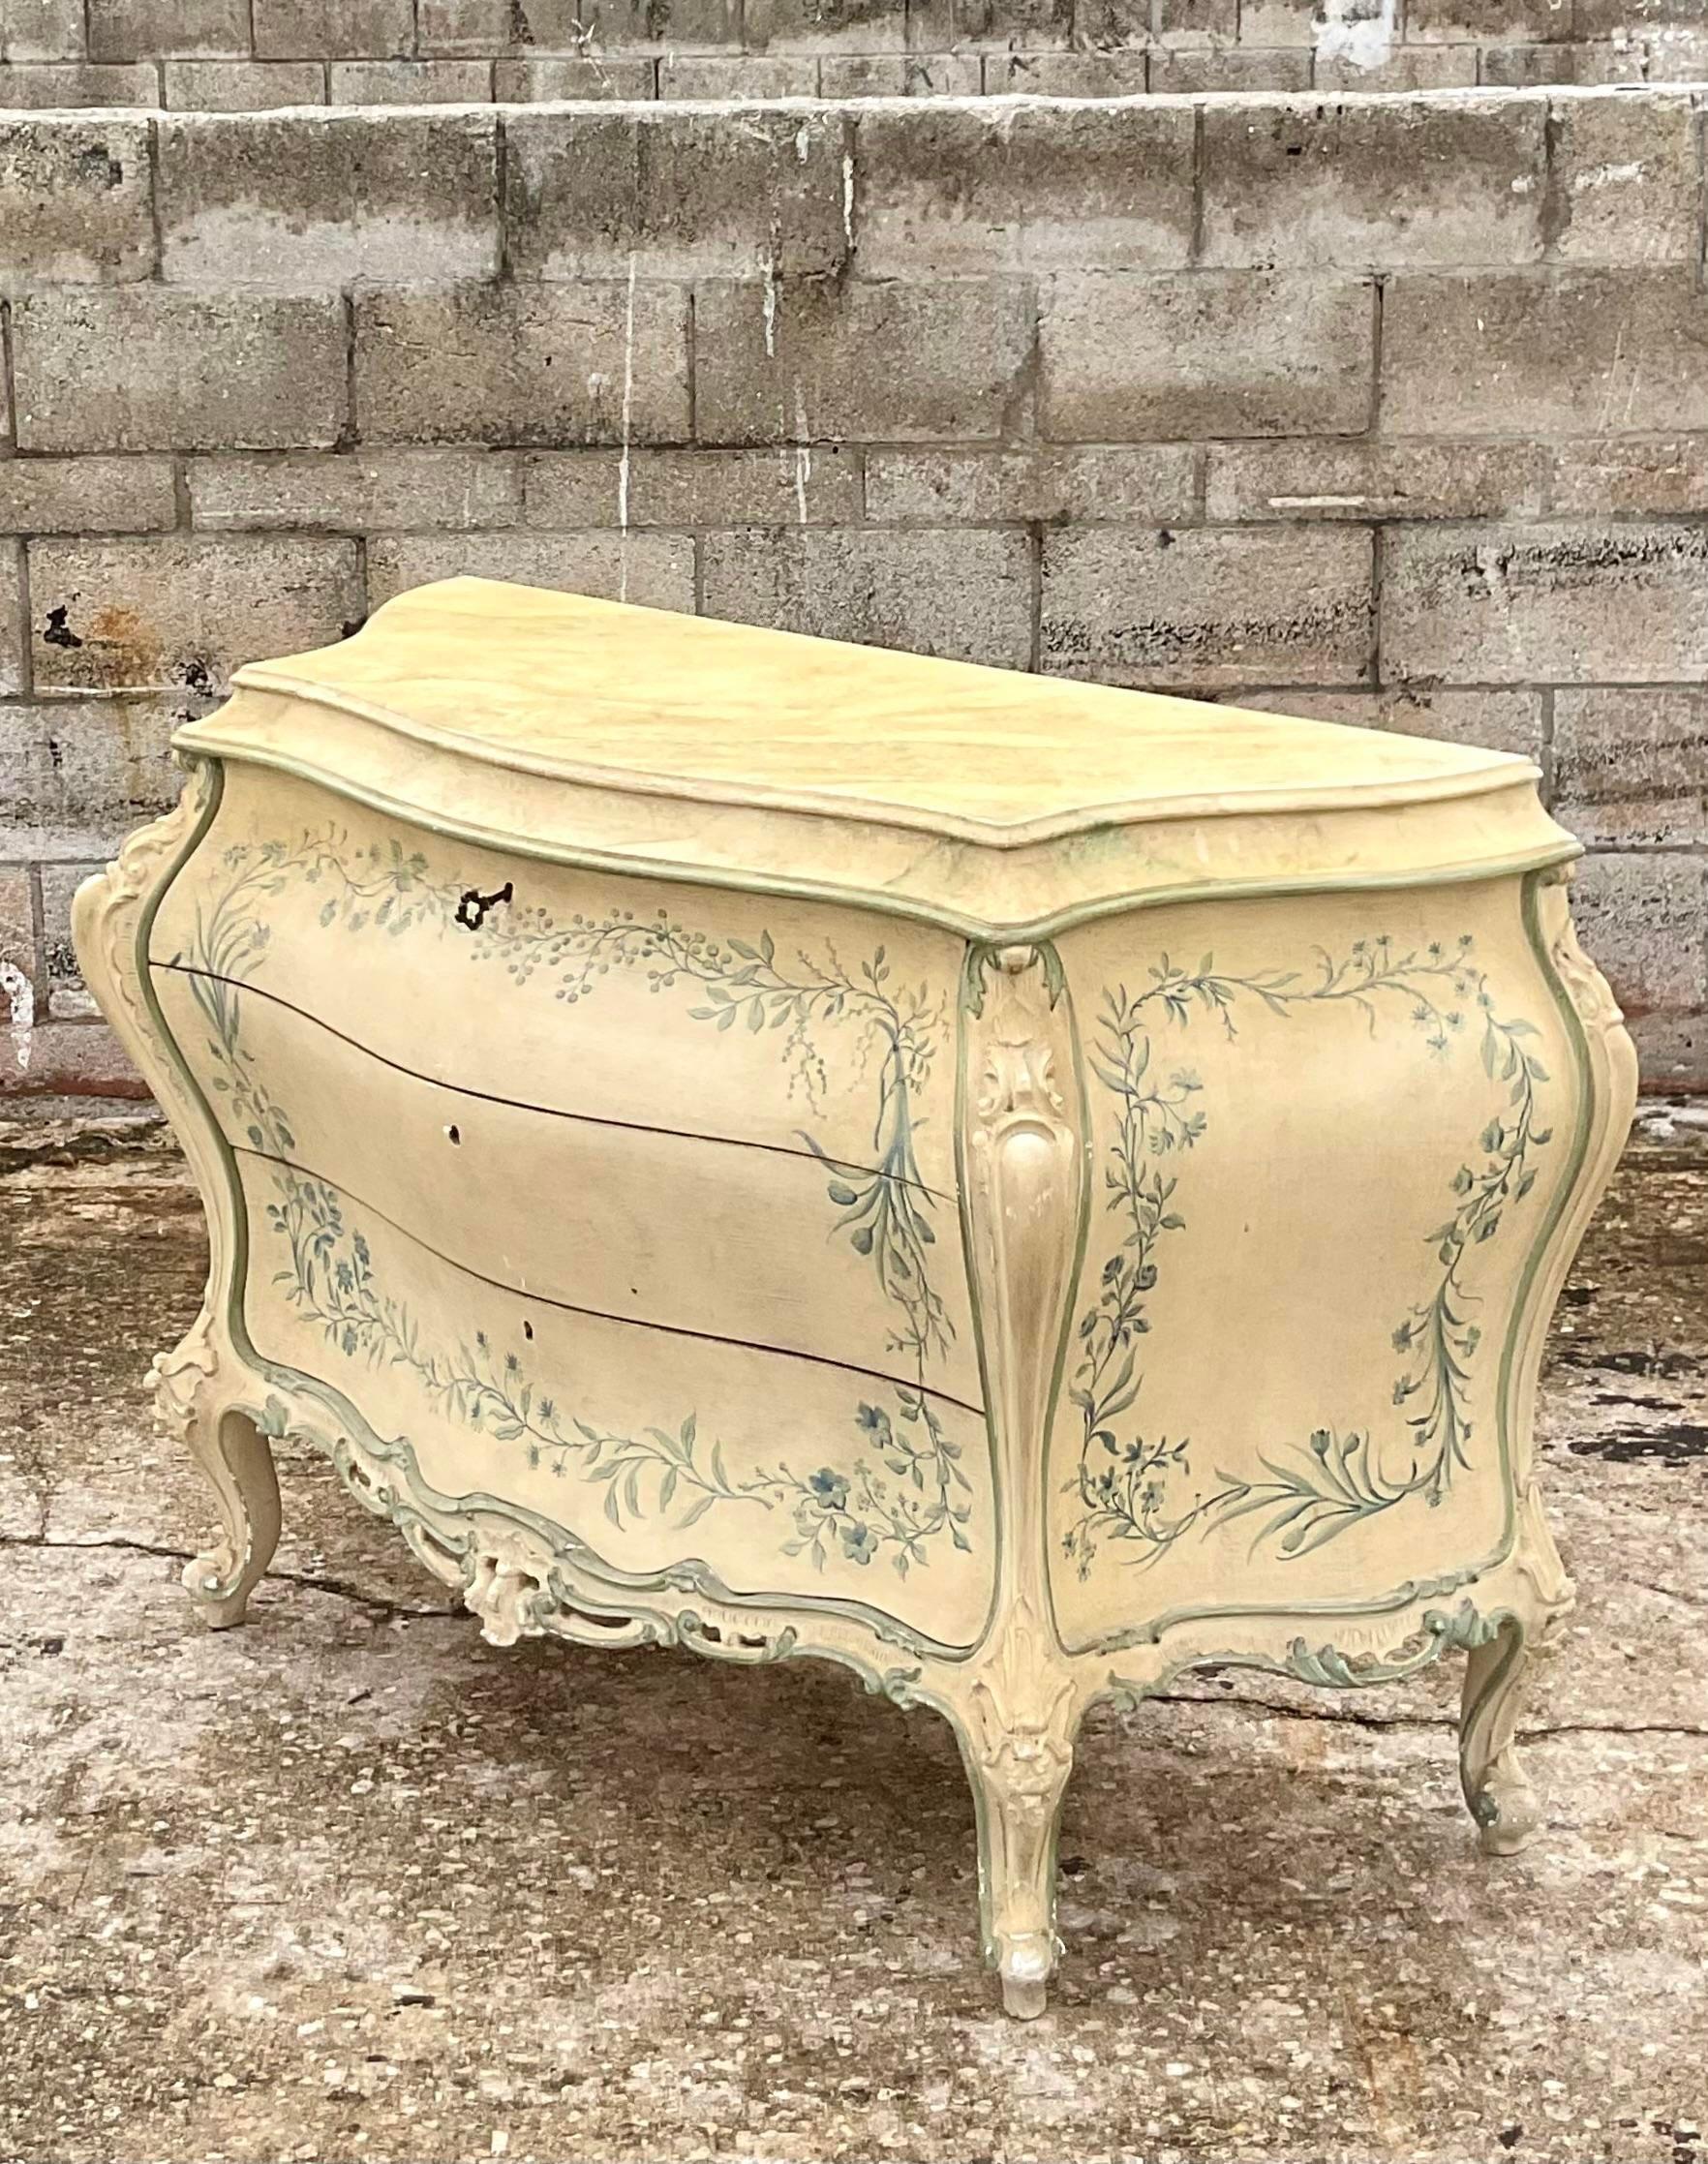 Spectacular vintage Regency hand painted commode. The height of Parisian chic in iconic blue and white. Three drawers that open with a key and beautiful ring of floating flowers. Hand carved detail. Acquired from a Palm Beach estate.